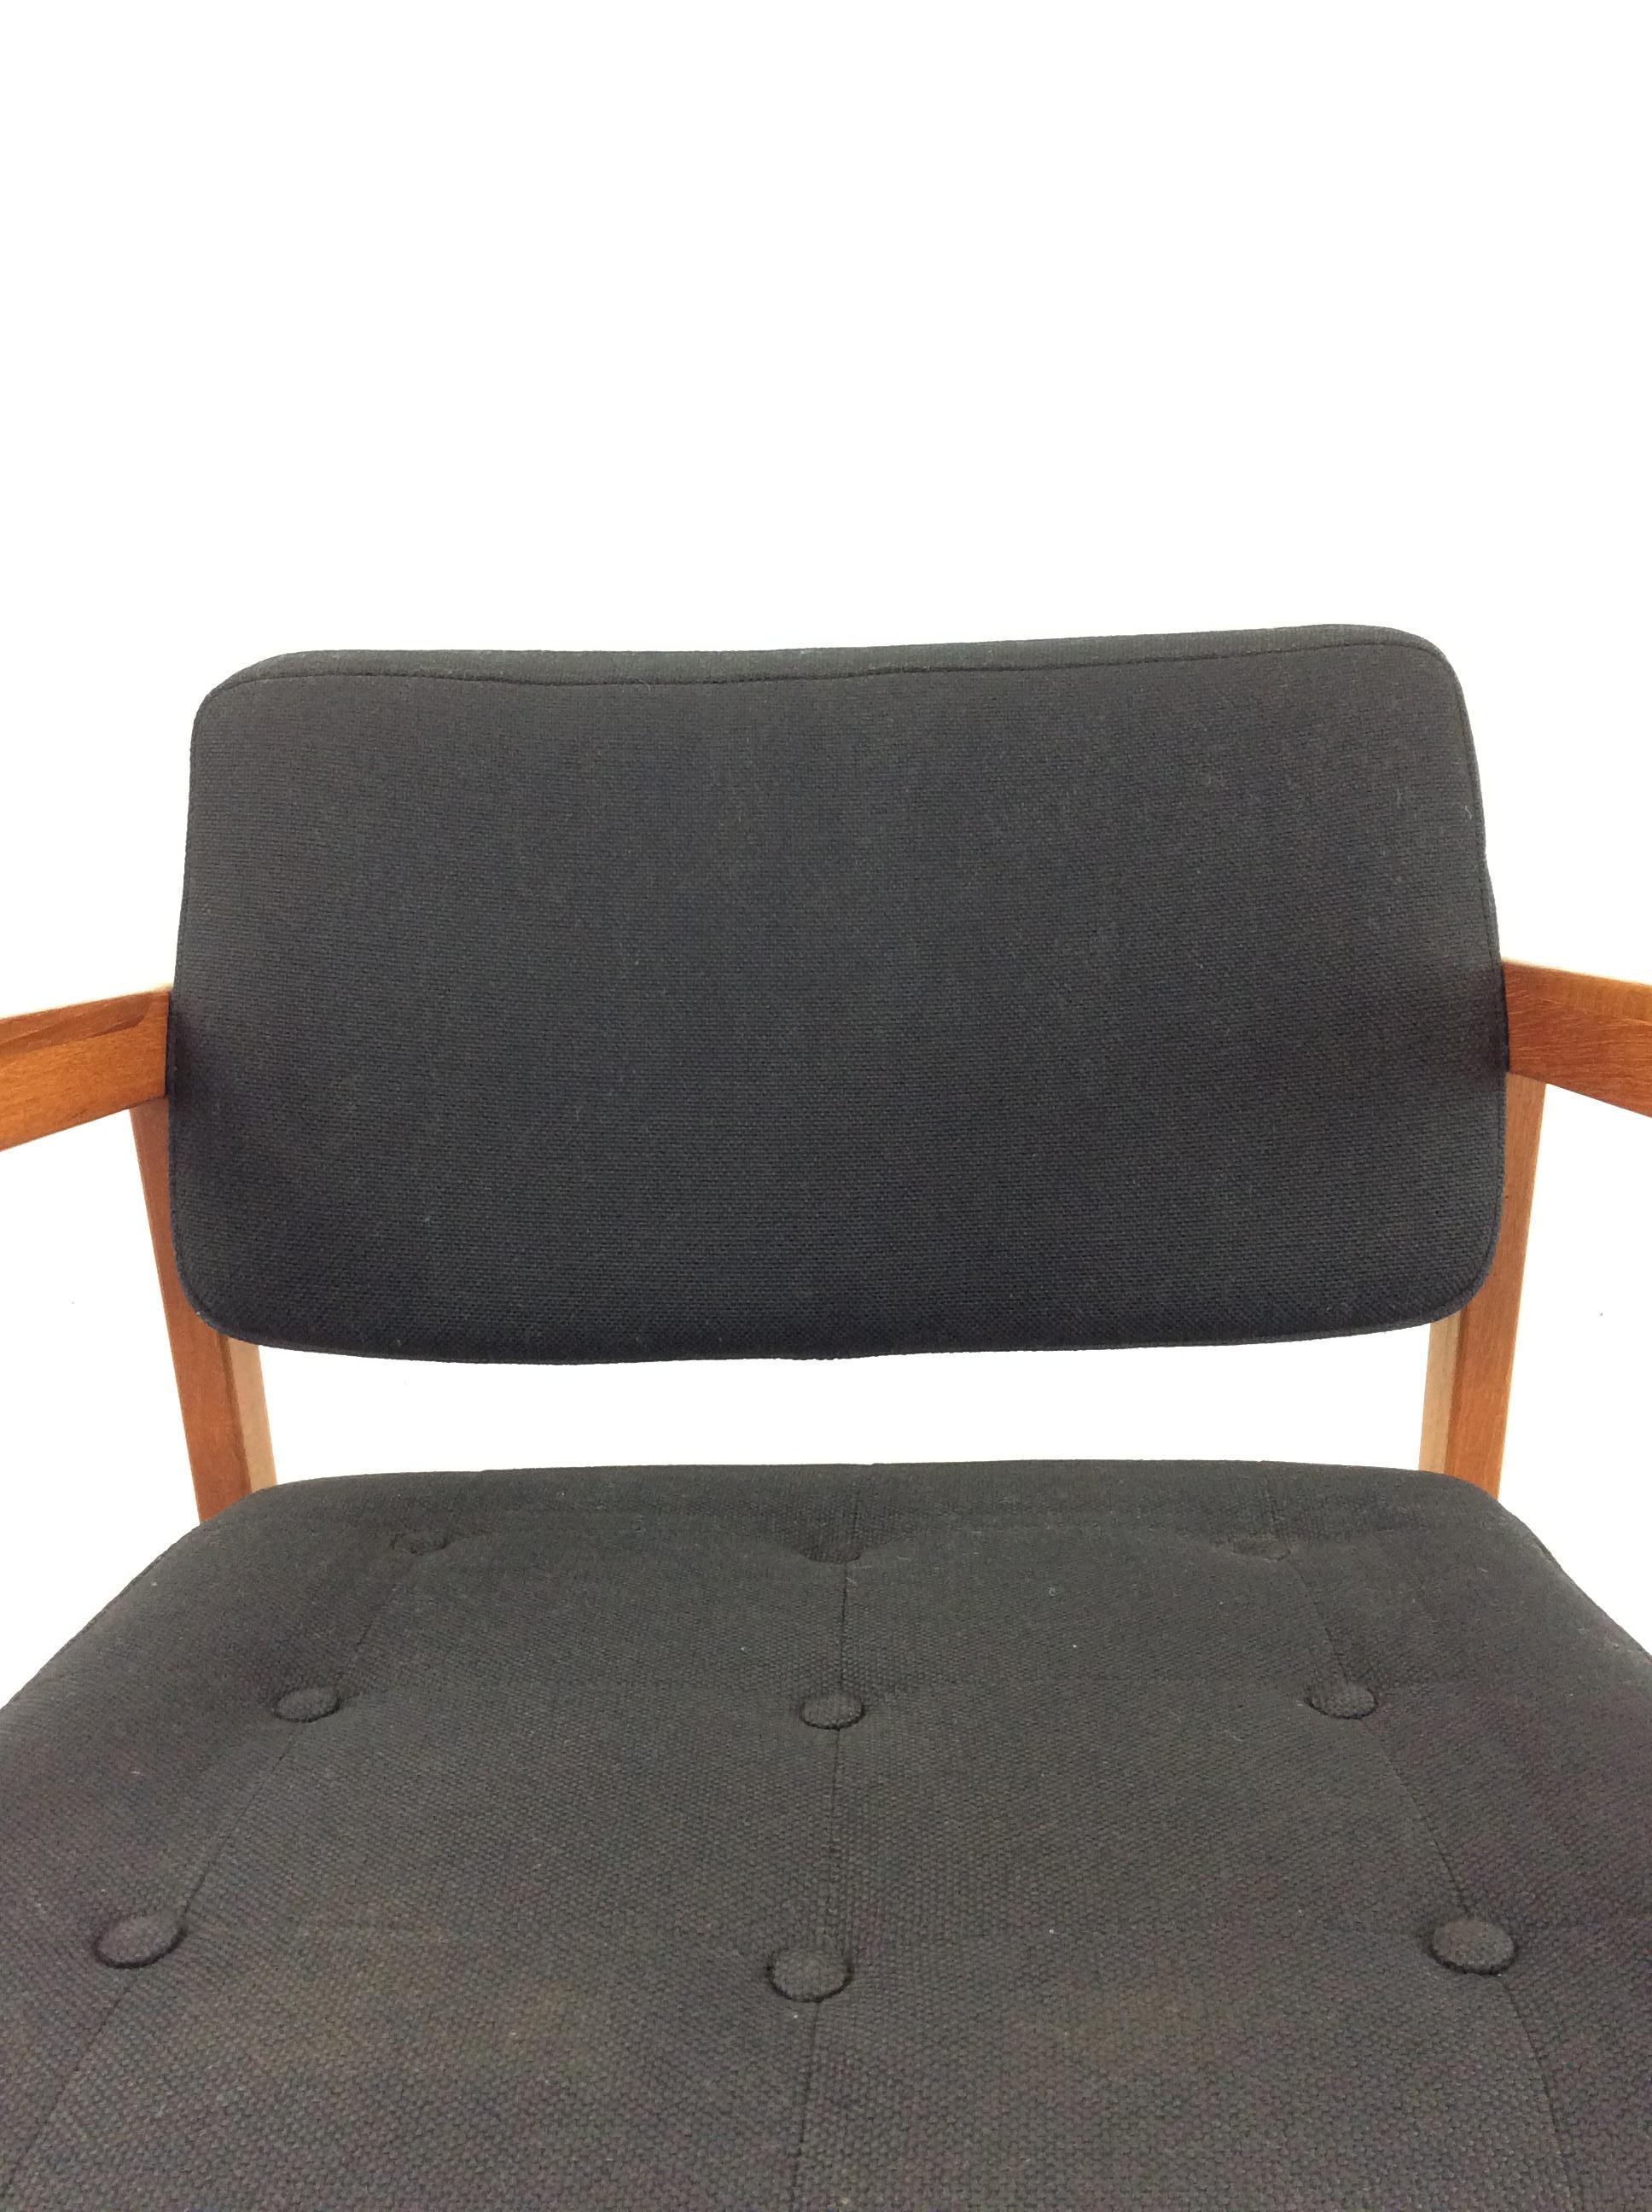 Danish Modern Armchair with Teak Frame & Vintage Upholstery In Excellent Condition For Sale In Freehold, NJ